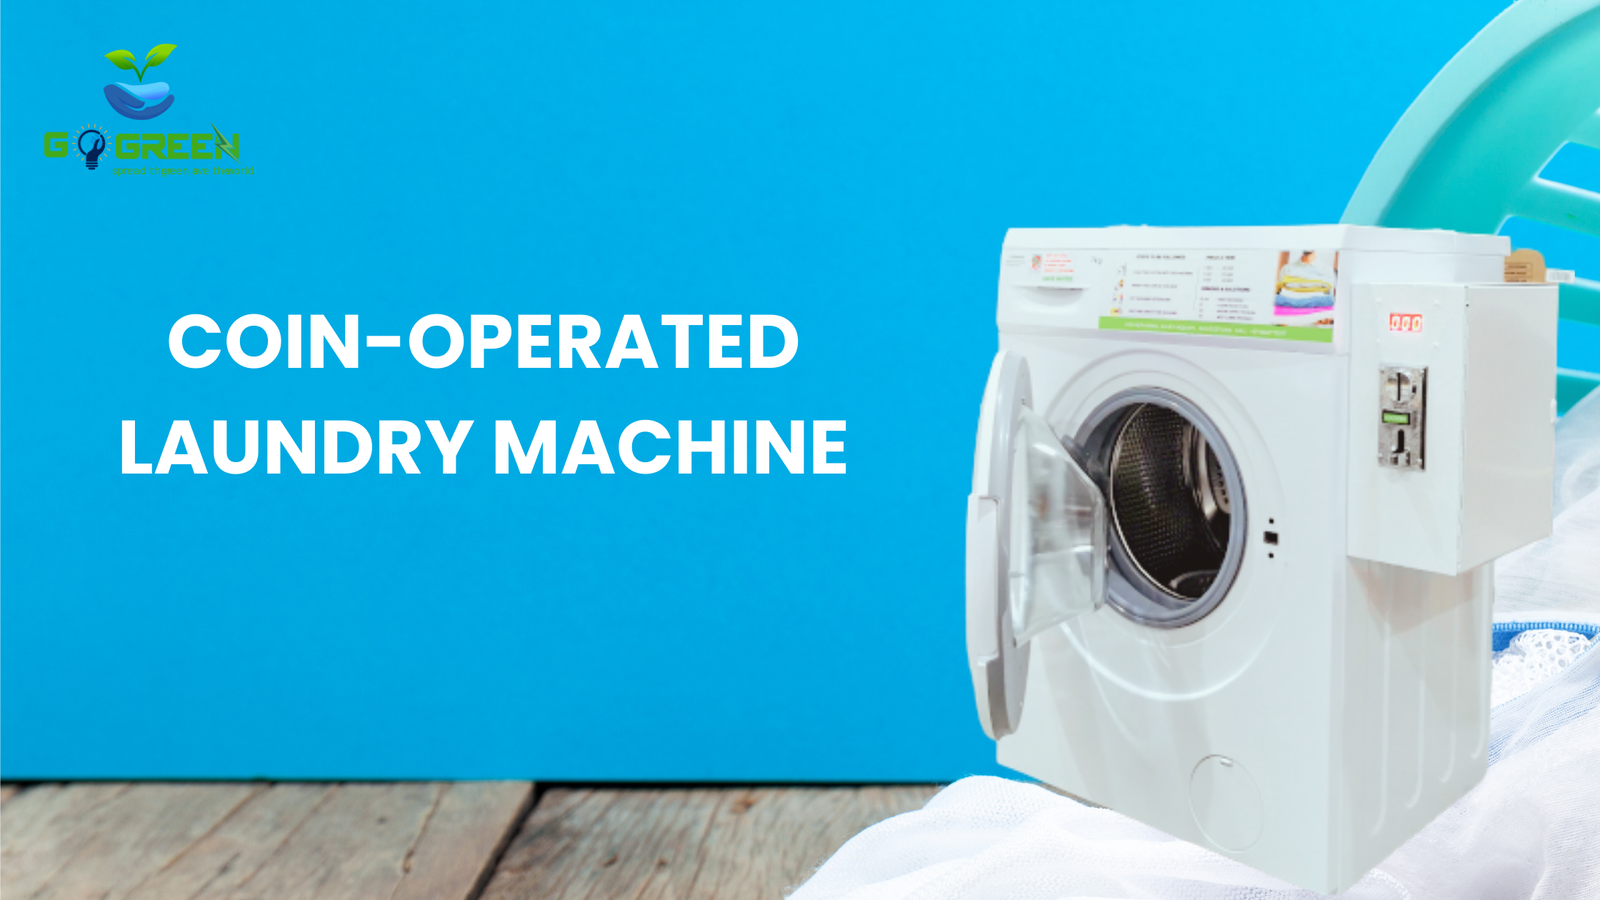  User-Friendly Coin-Operated Laundry Machine for Diverse UAE Customers 